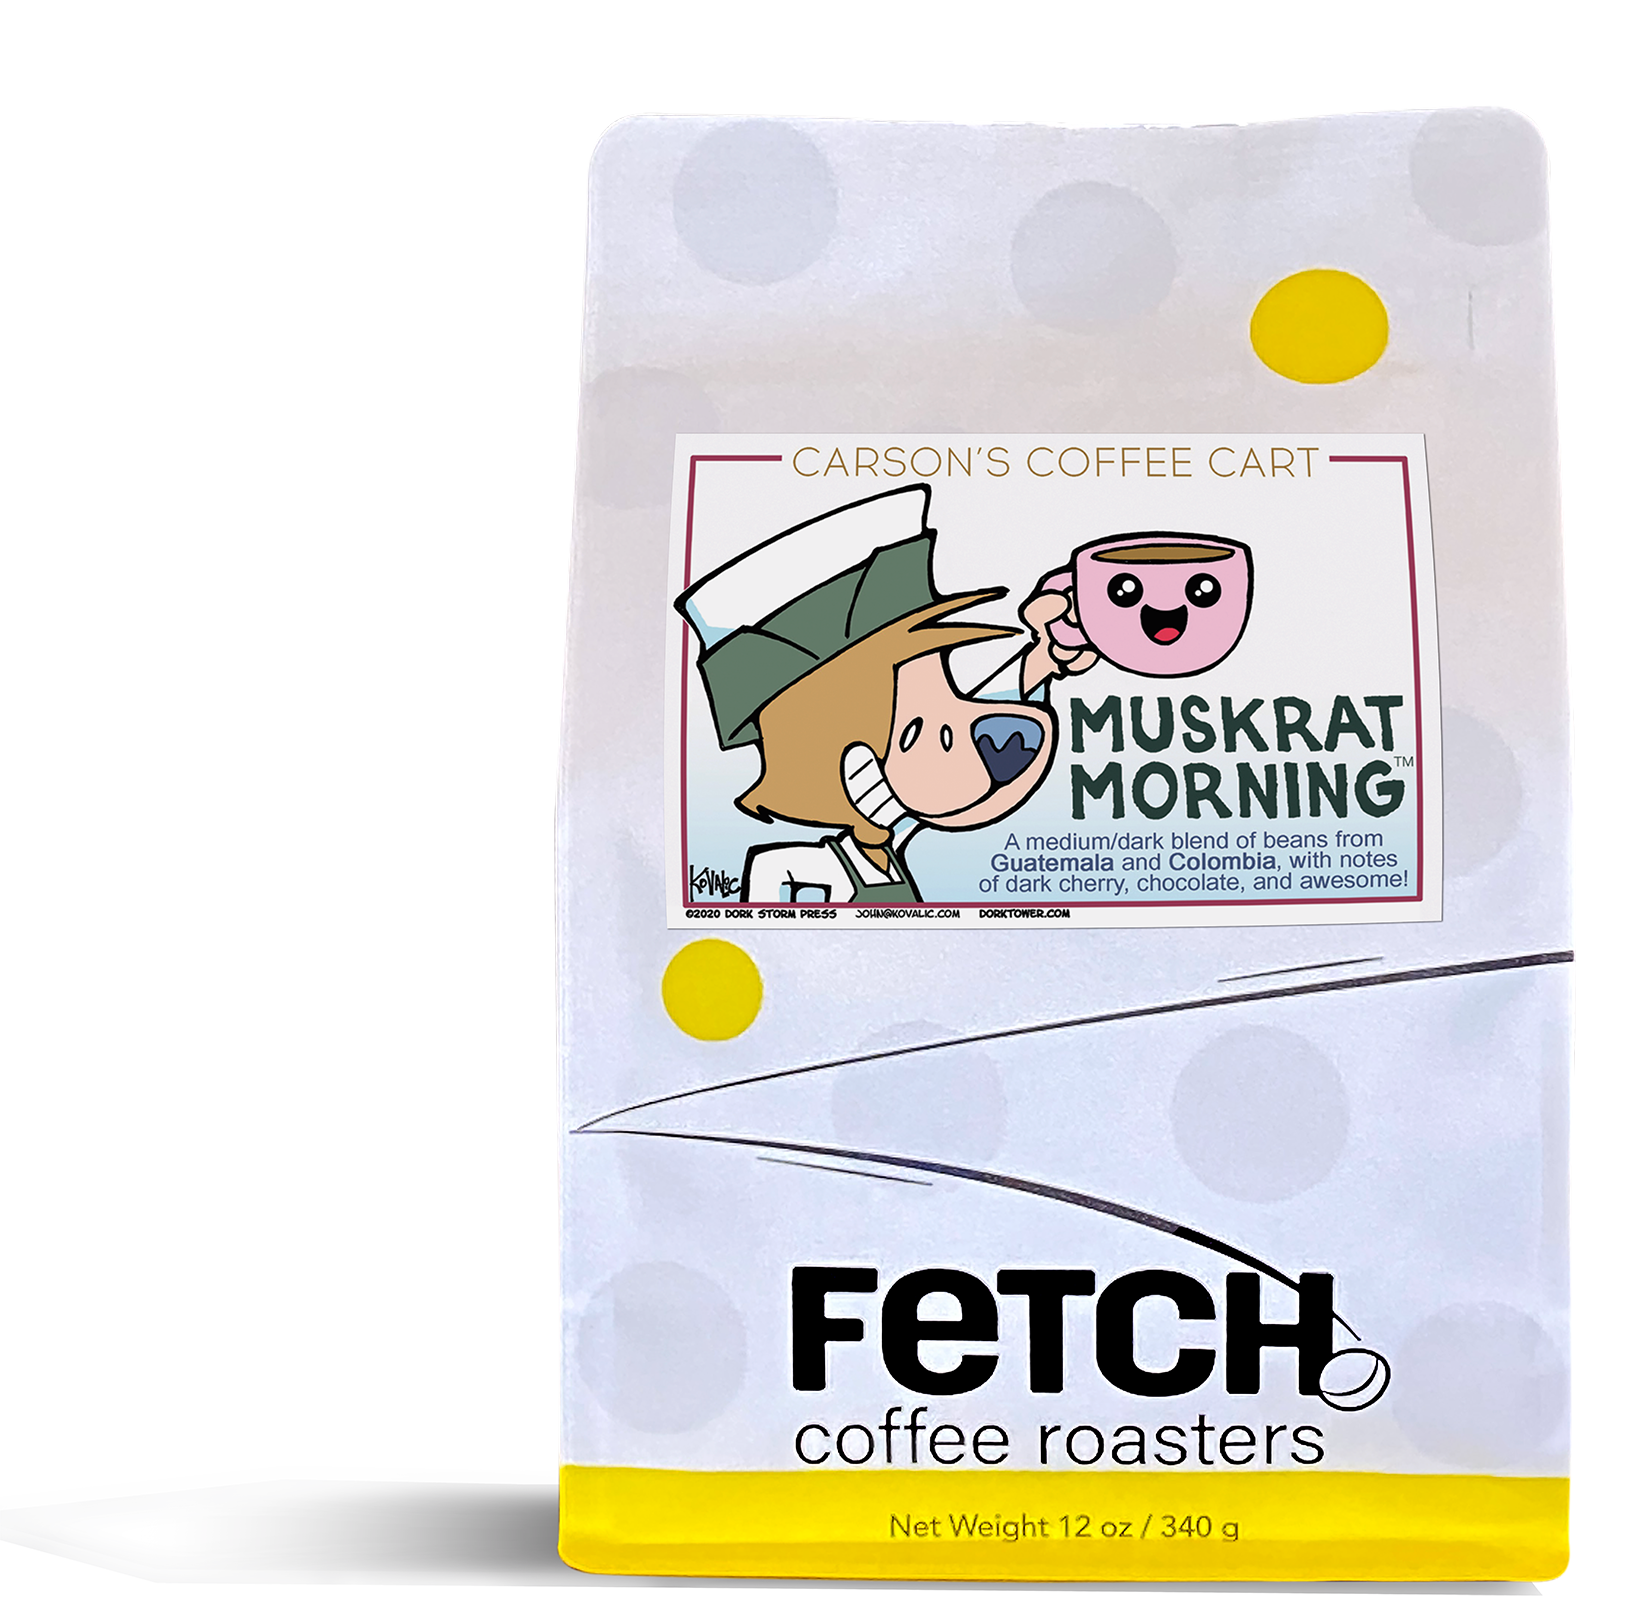 Muskrat Morning has a drawing of Carson the Muskrat from Dork Tower, drawn by John Kovalic. The top of the white Kraft paper coffee bag is reclosable. The bottom of the bag has a yellow band, and the logo shows a bean sitting at the base of the 'h' in Fetch.